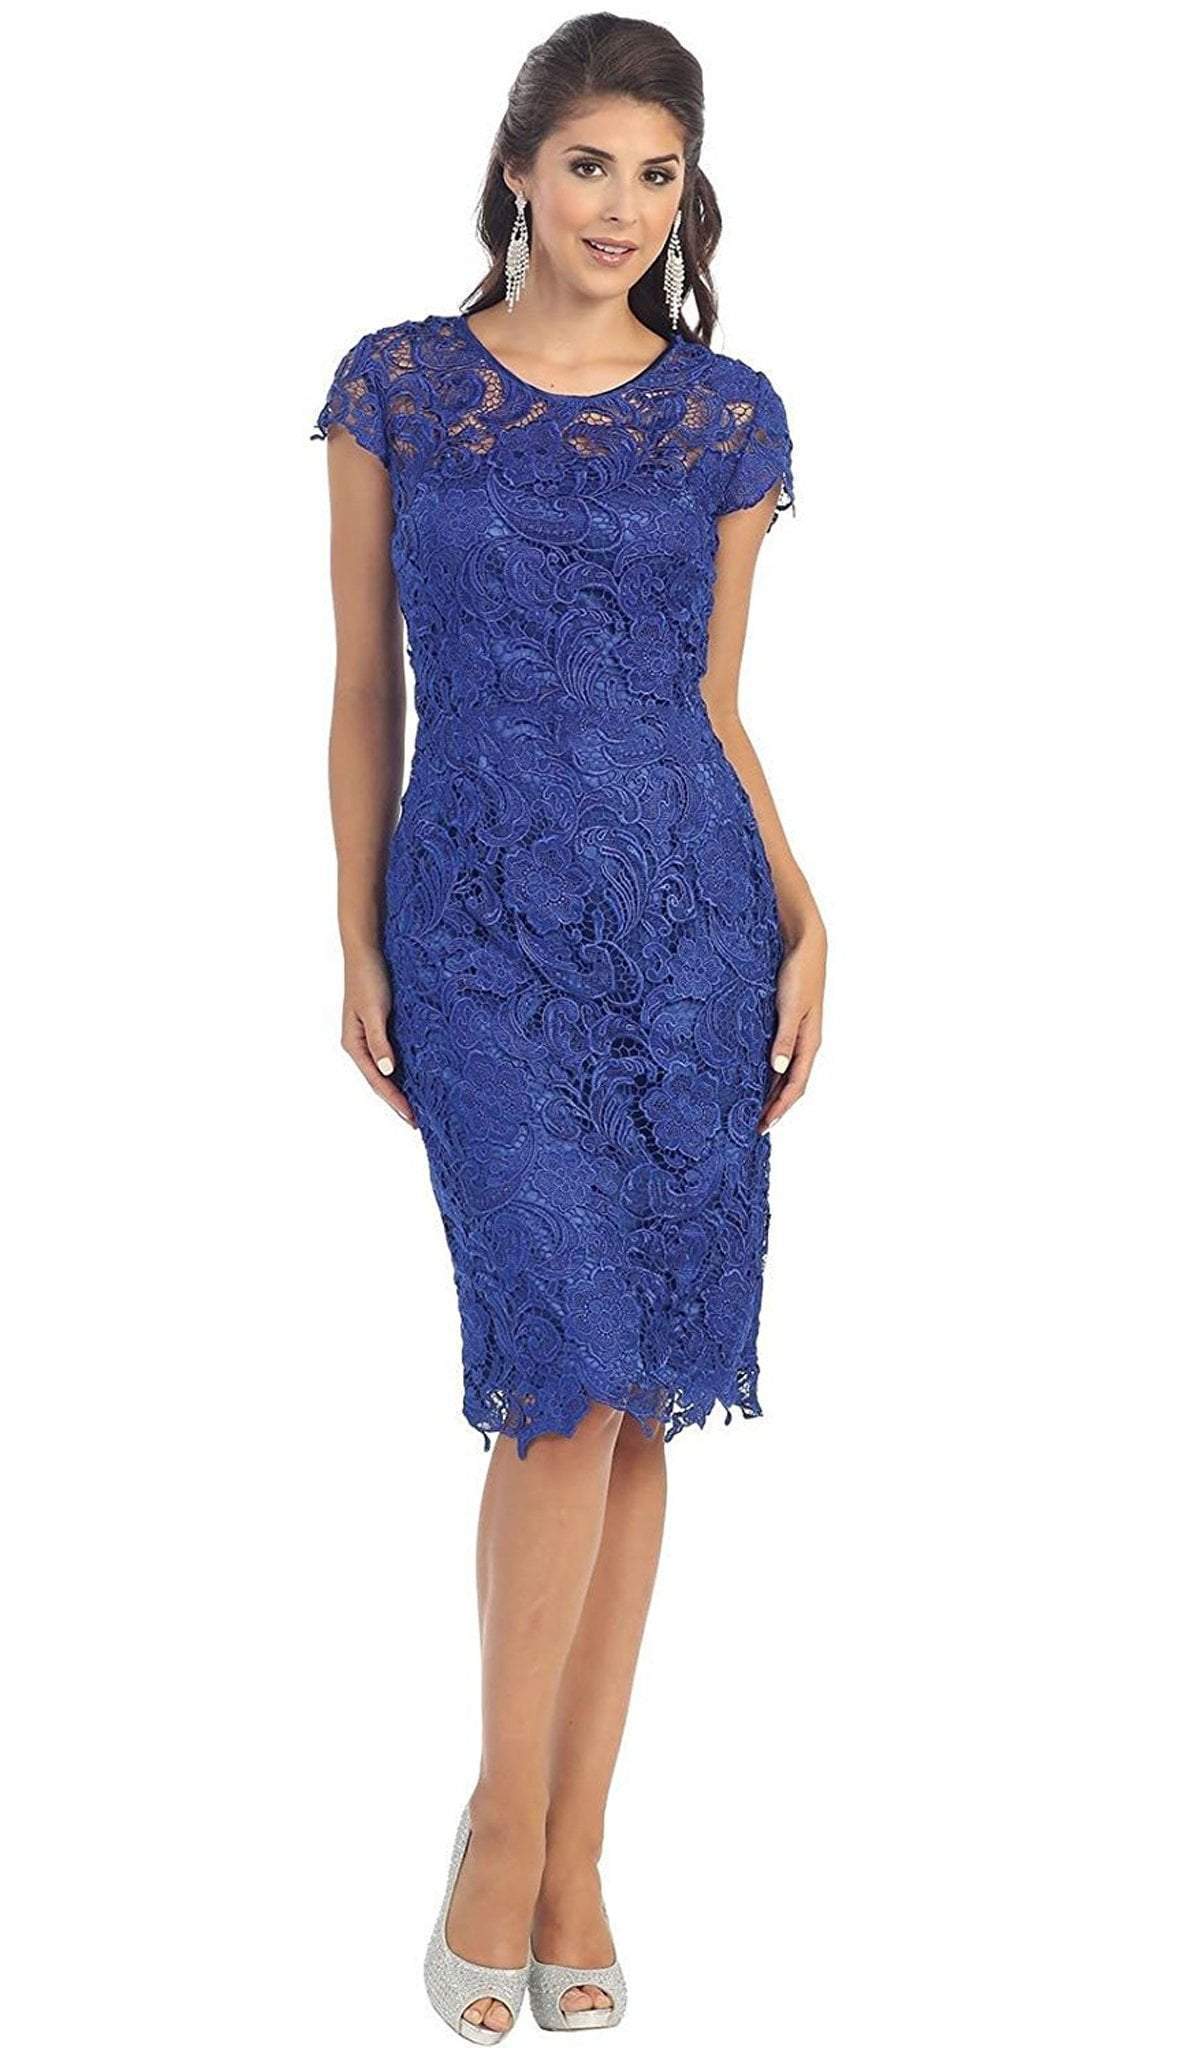 May Queen - Jewel Short Sleeves Scalloped Lace Cocktail Dress In Blue